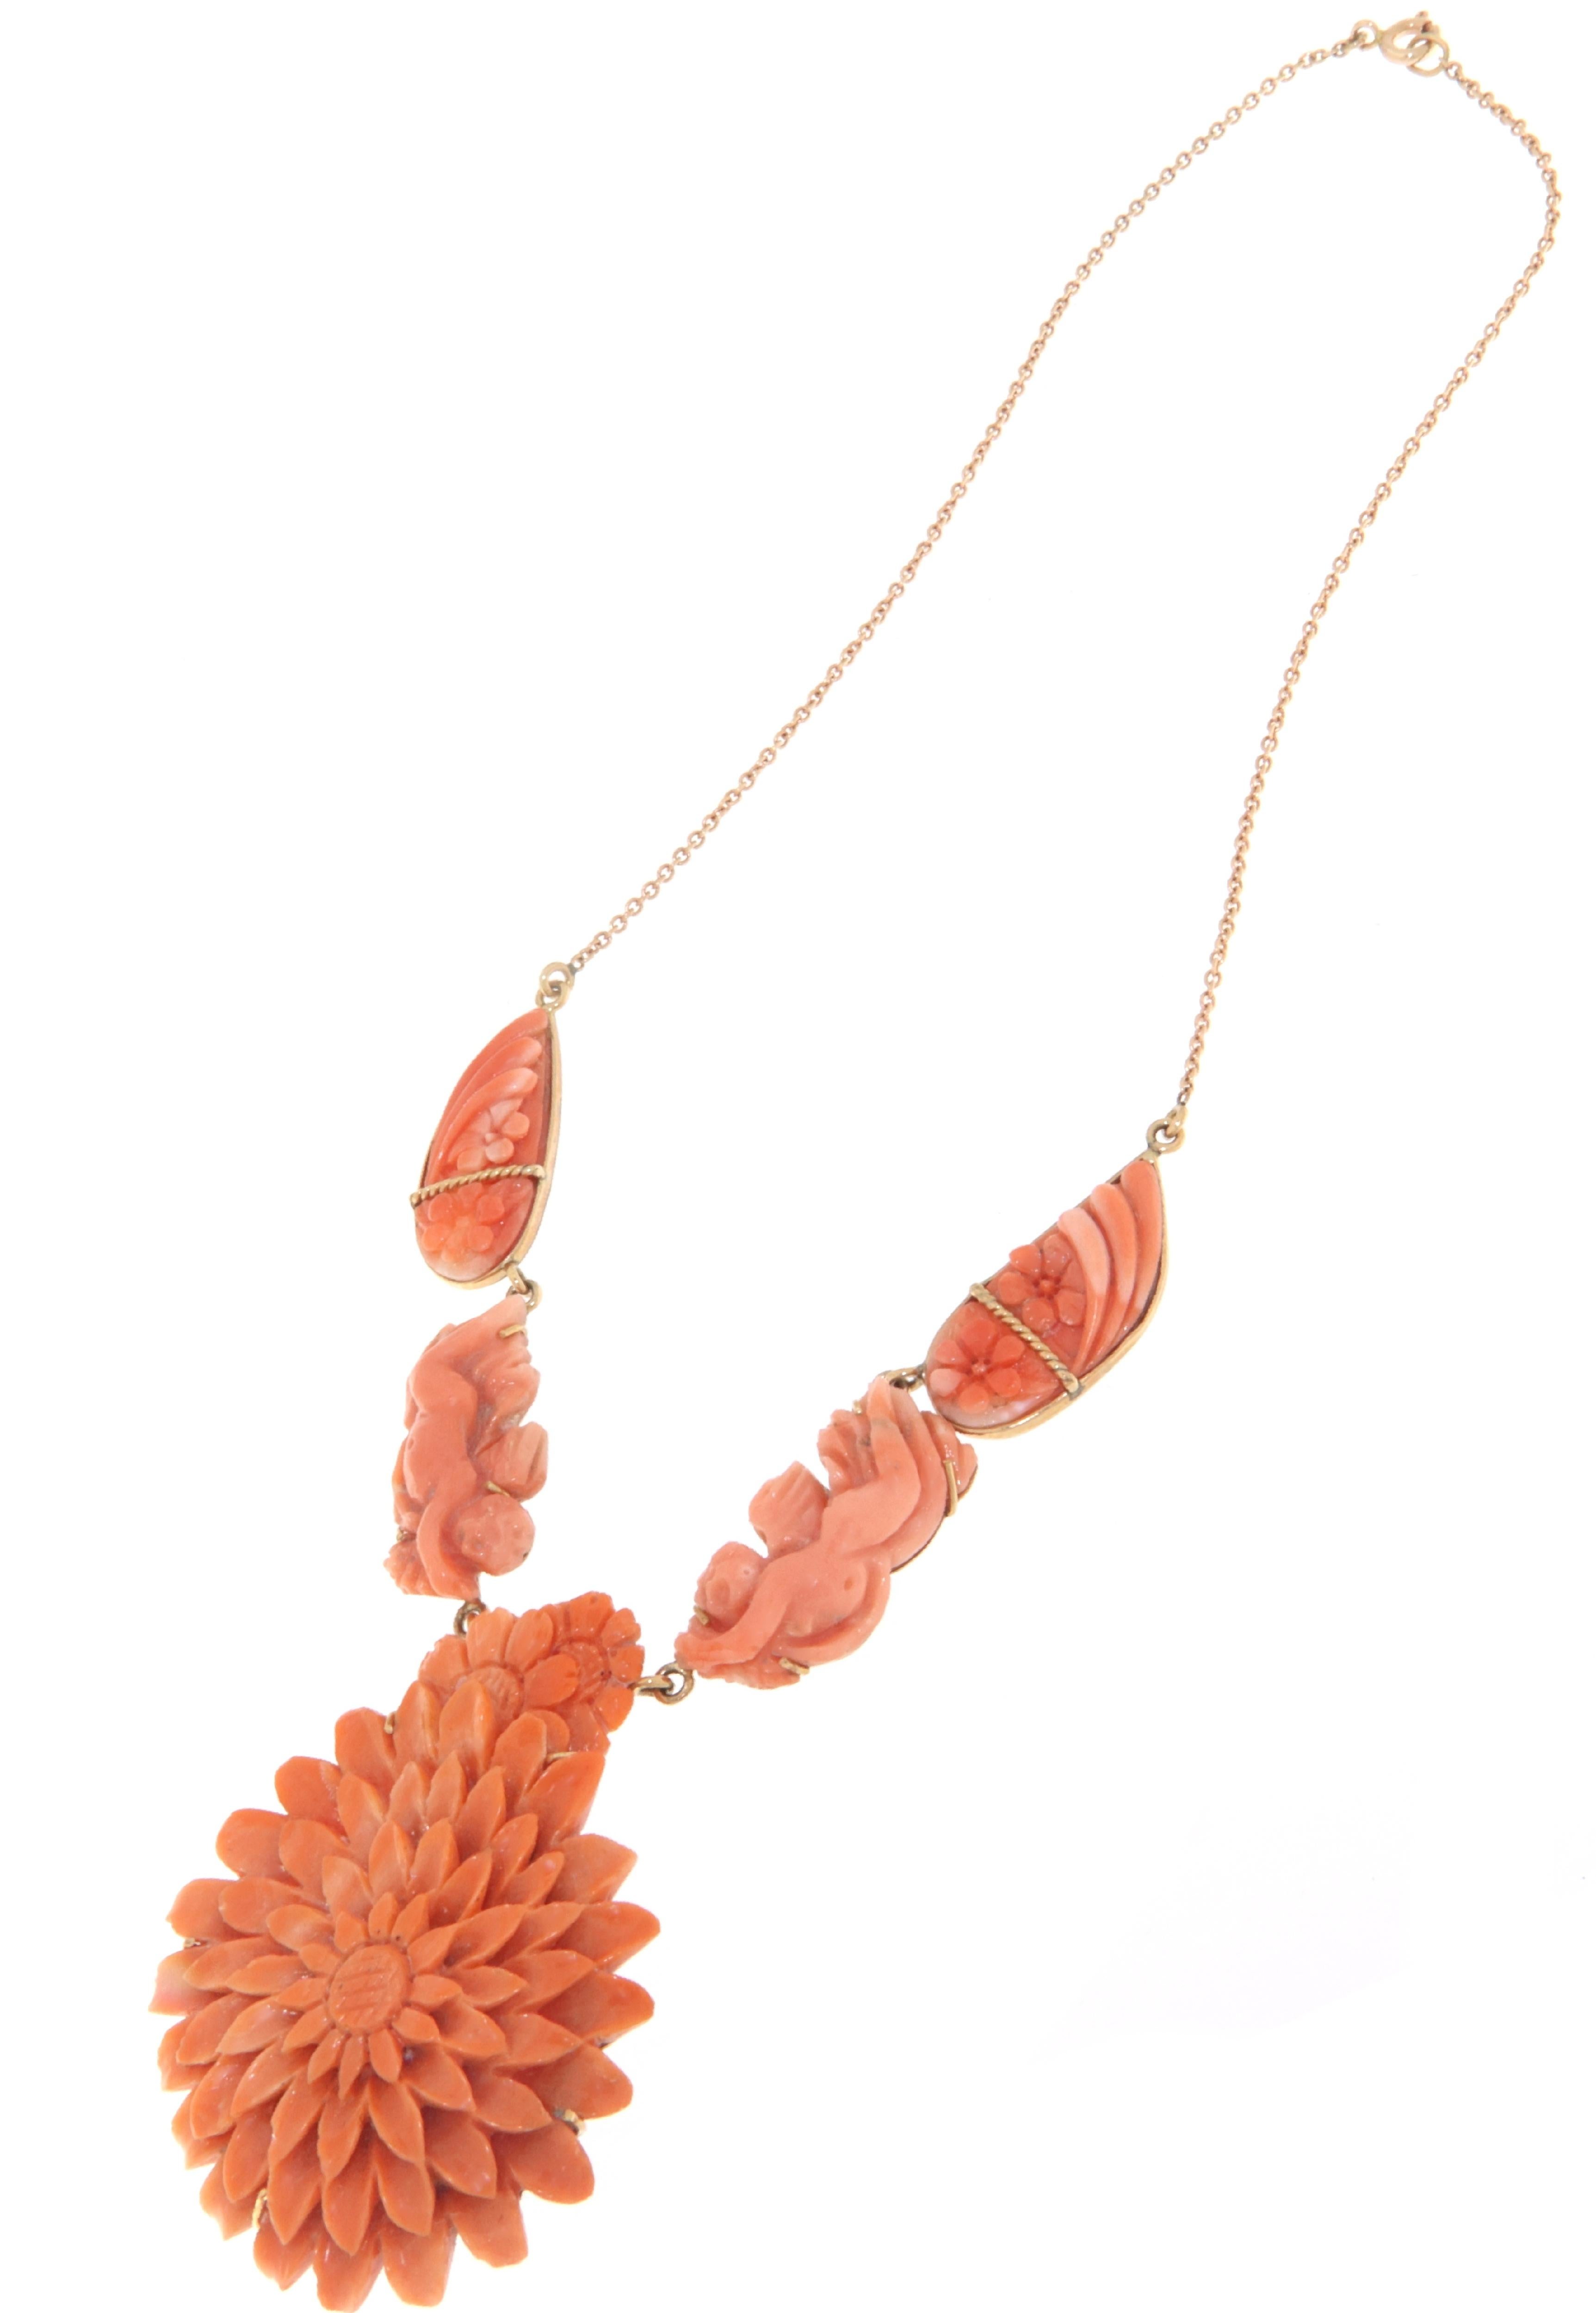 Spectacular necklace made of 14 kt gold and engraved natural coral, period workmanship from the second half of the twentieth century.

The smallest corals depict in the highest part two wings with engraved floral sculptures that support two